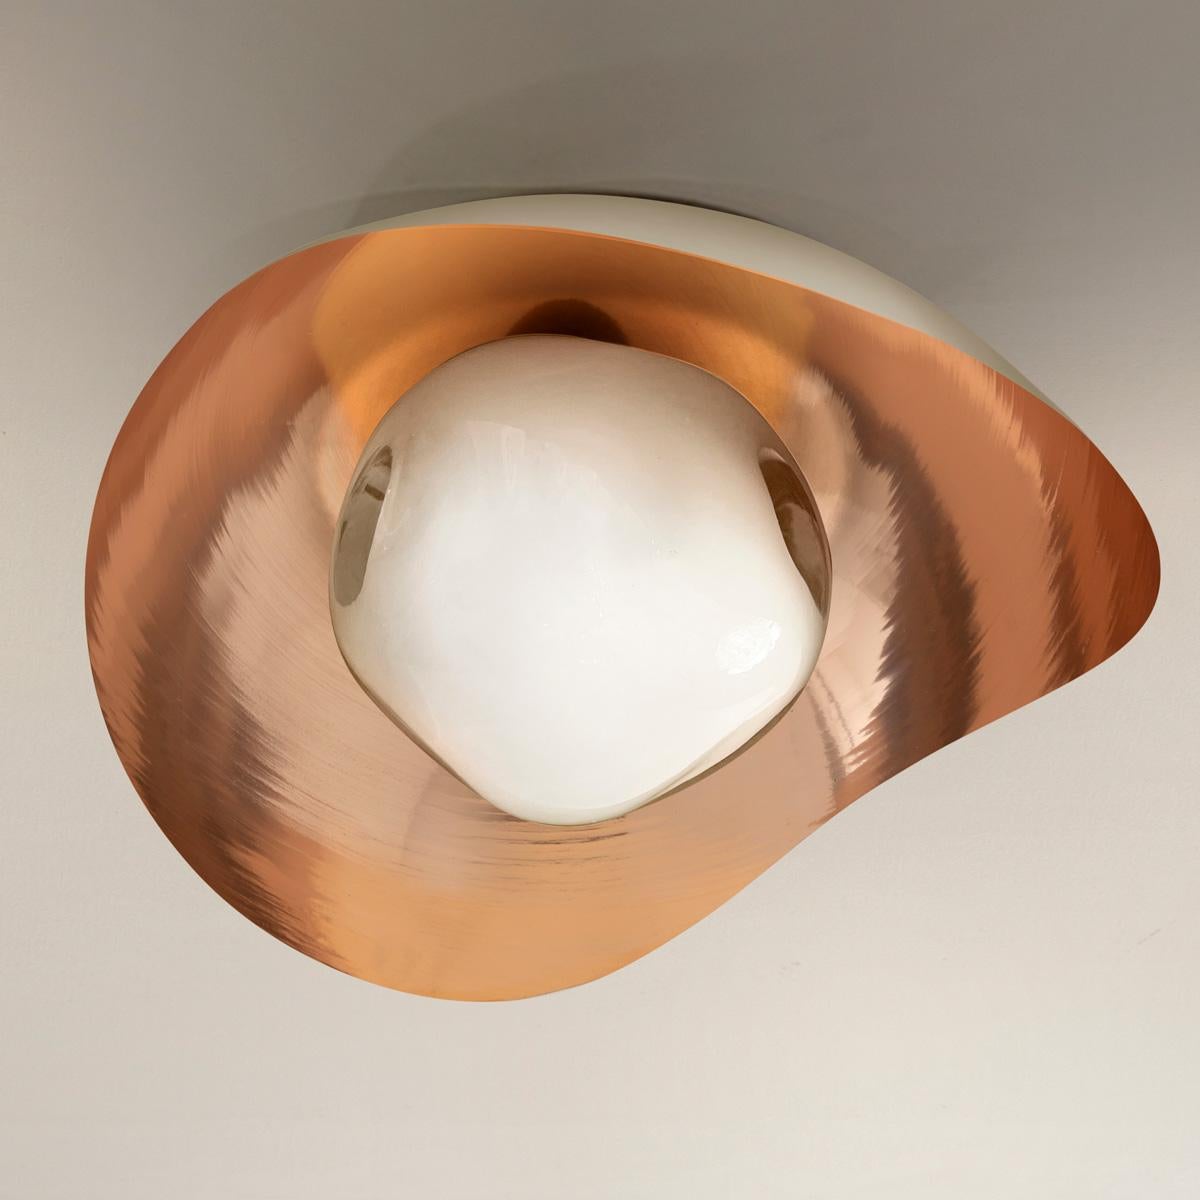 Organic Modern Perla Flushmount Ceiling Light by Gaspare Asaro-Polished Copper/Sand White For Sale